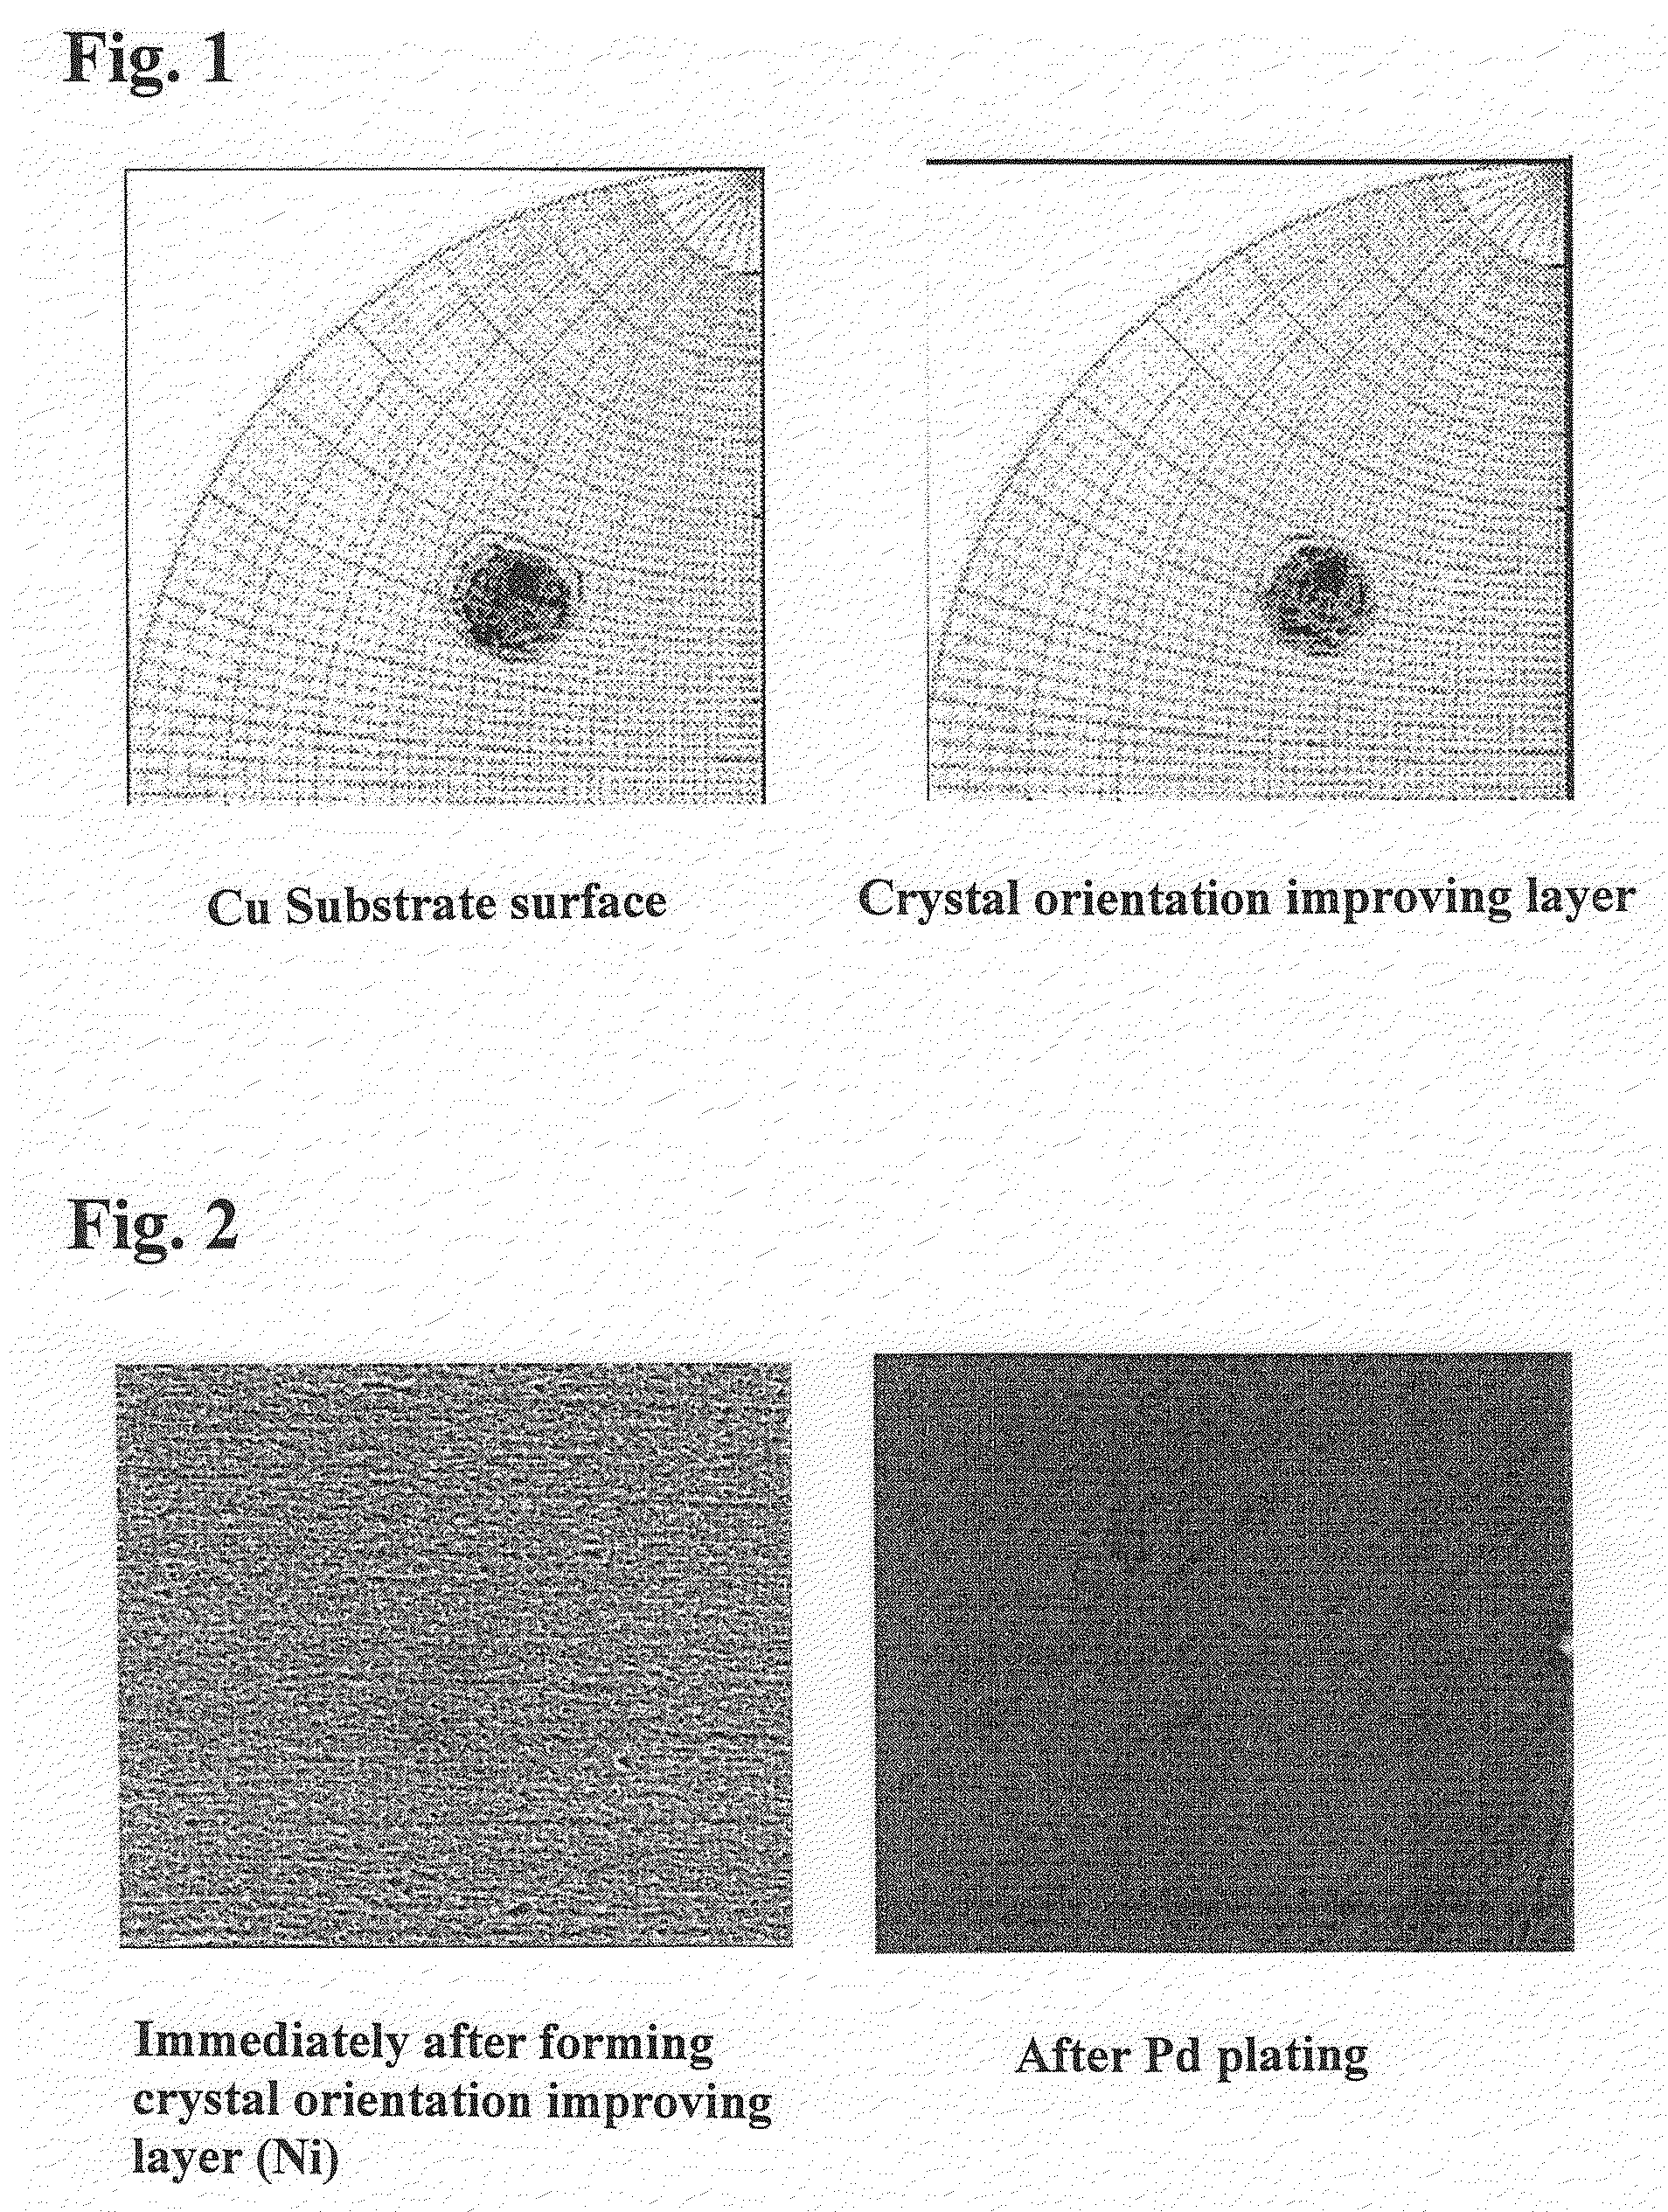 Textured substrate for epitaxial film formation and surface improving method of textured substrate for epitaxial film formation